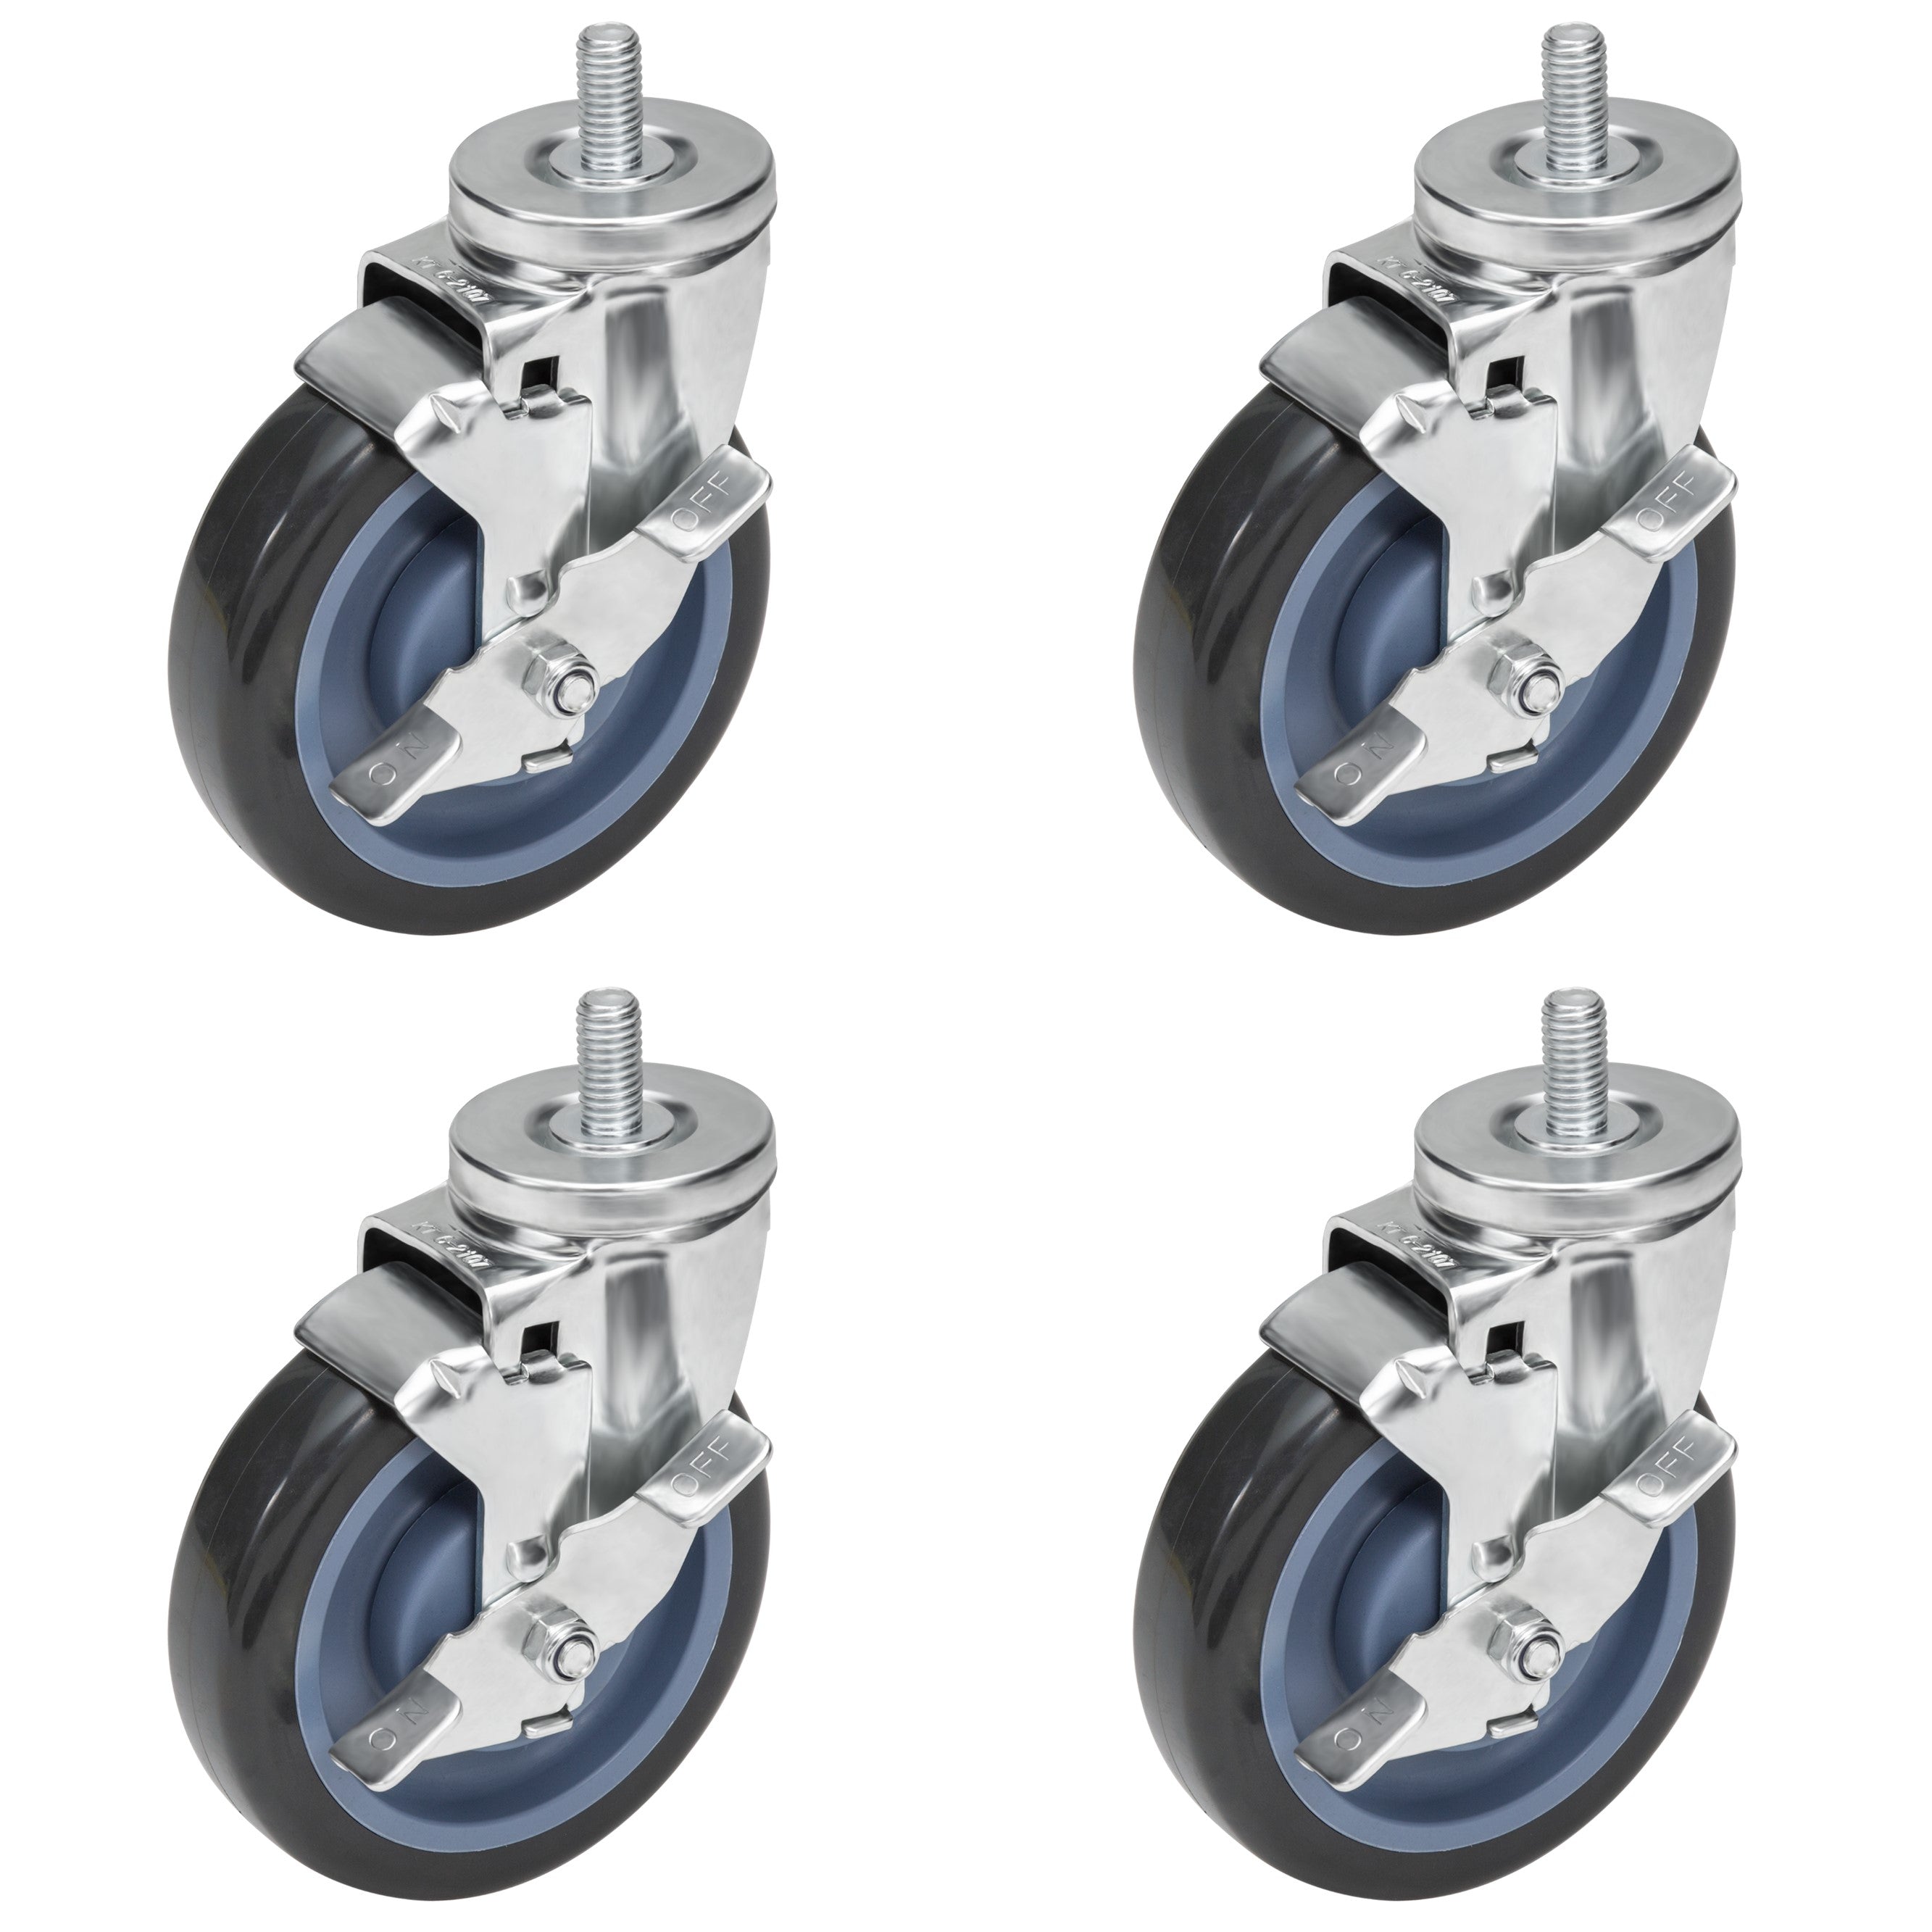 GSW 3" Caster Replacement Cart Wheels, Polyurethane Stem Casters Set of 4 for GSW Cart (C-SCE), Platform Cart, Industrial Cart with Loading Capacity of 1160 Lbs (Swivel with Brake)